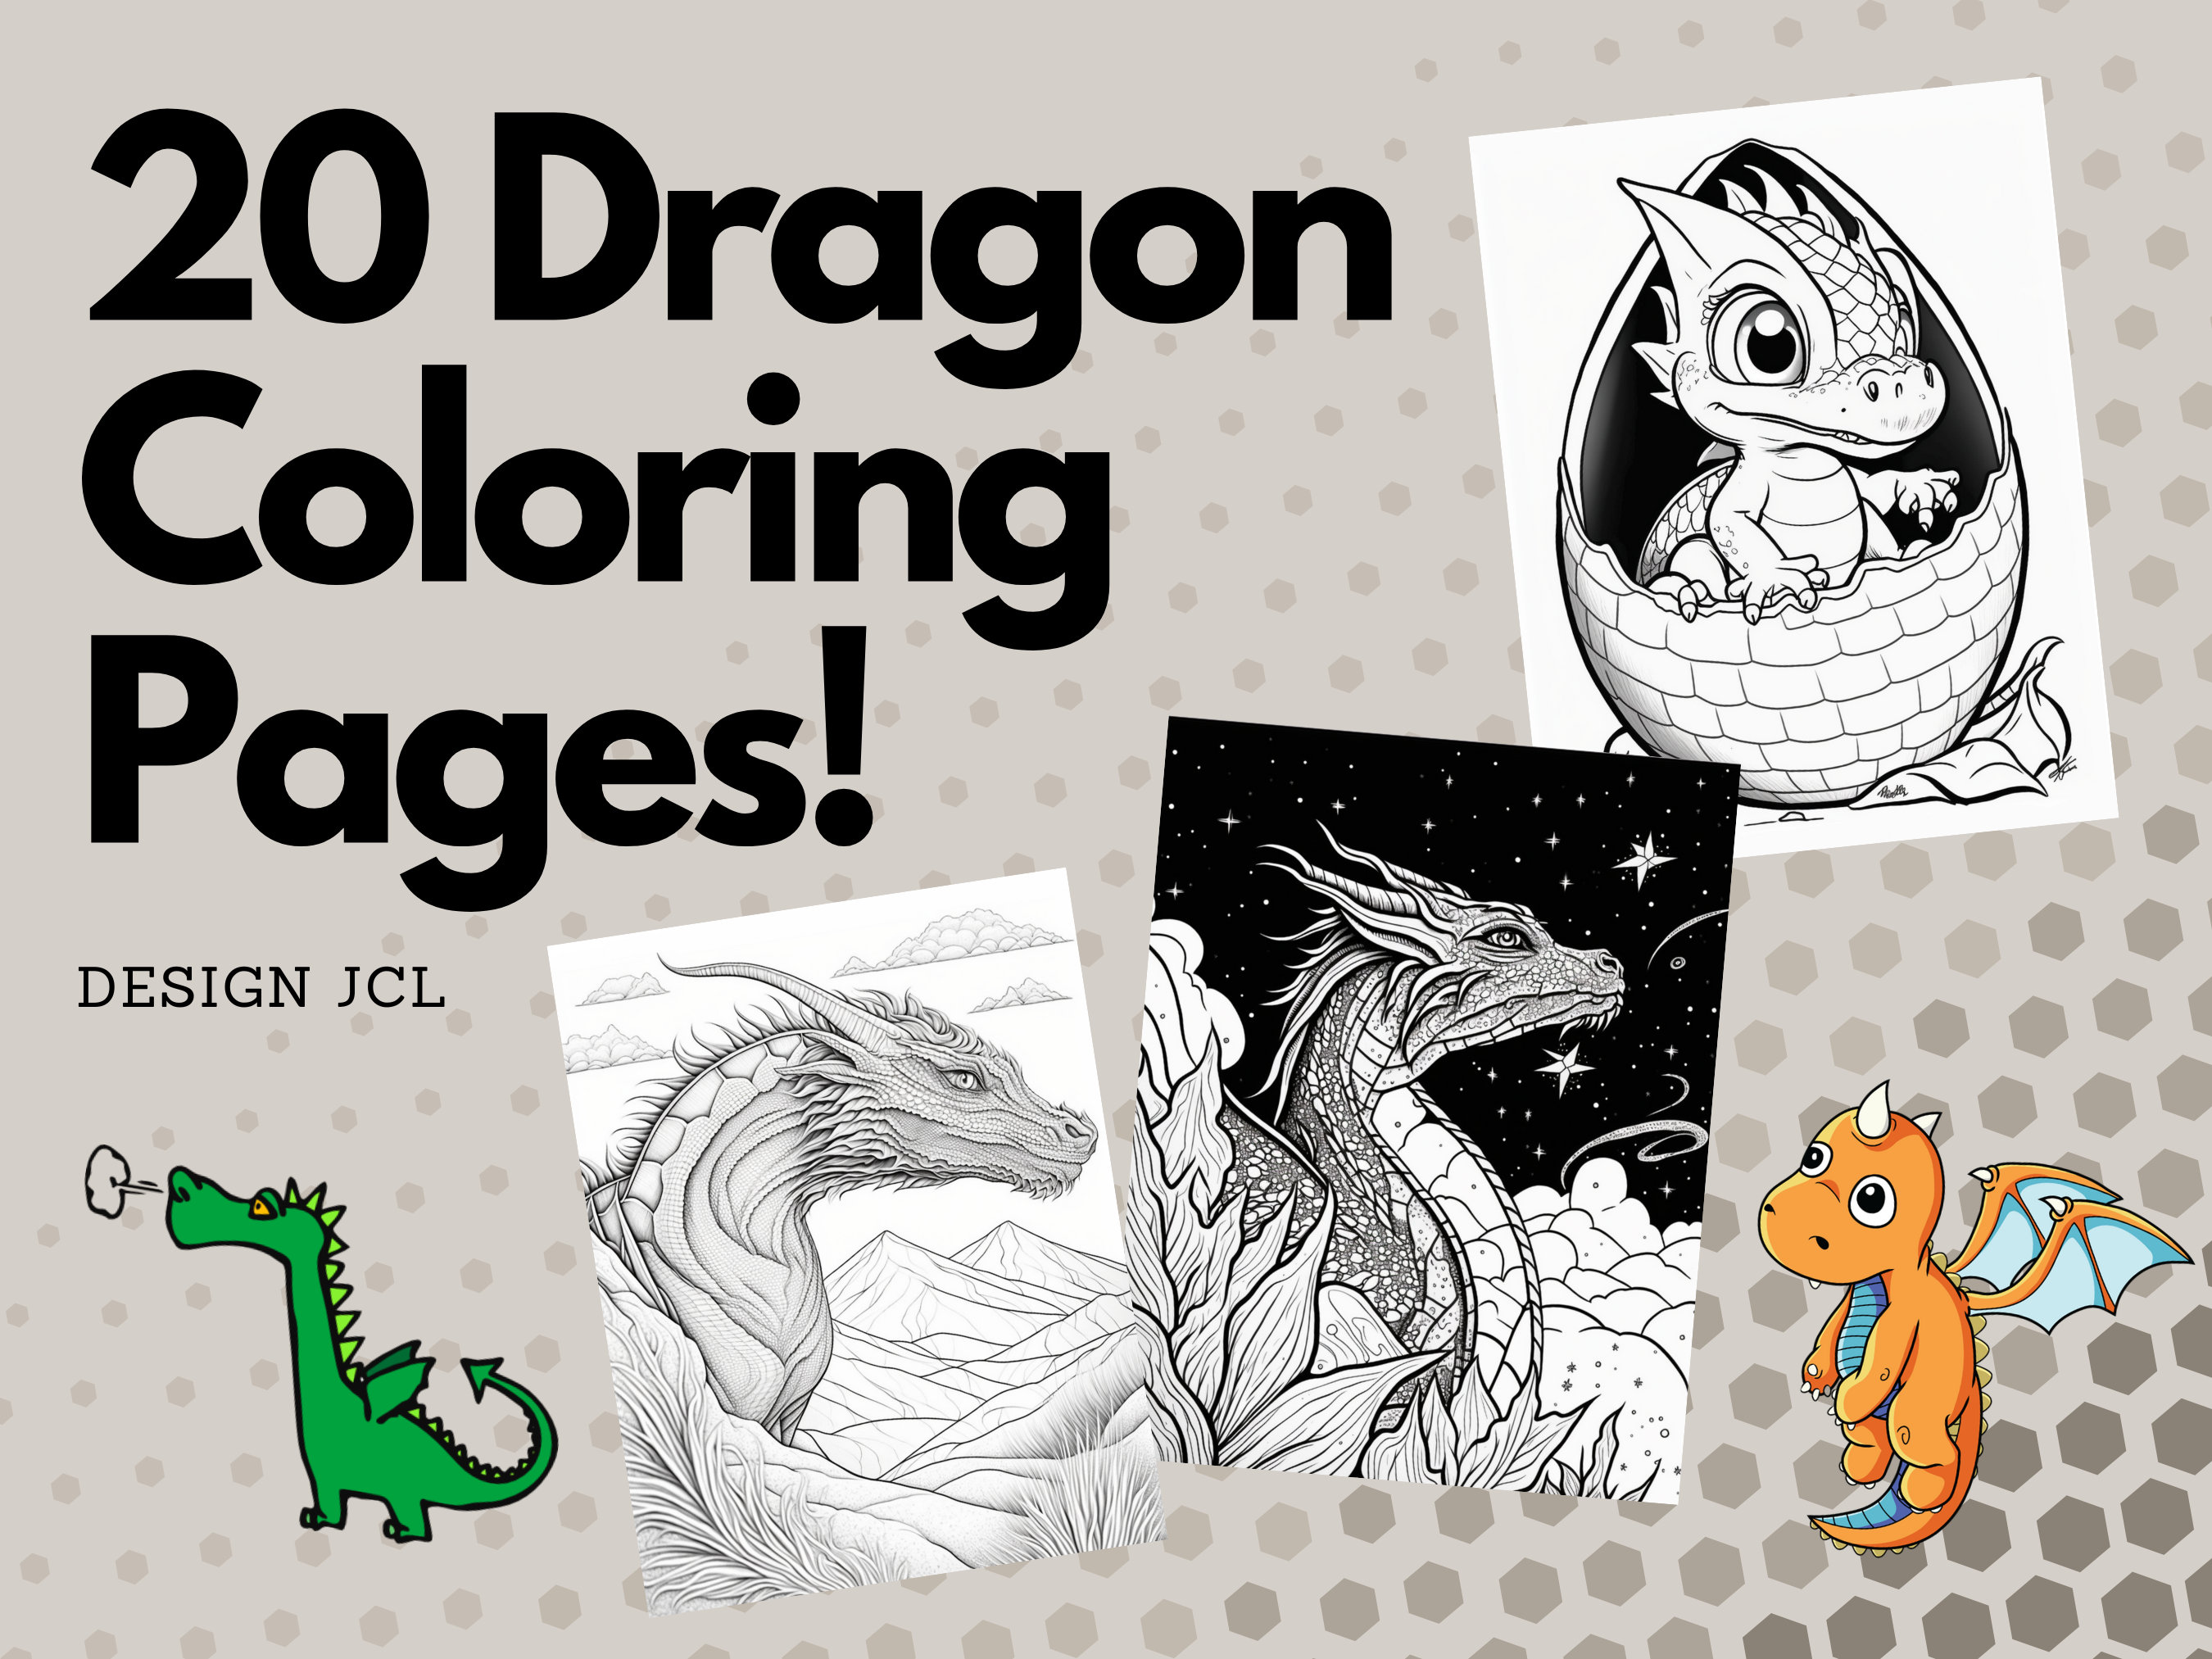 Dragon coloring pages printable coloring pages kids coloring pages adult coloring pages dragon inspired coloring pages baby dragons